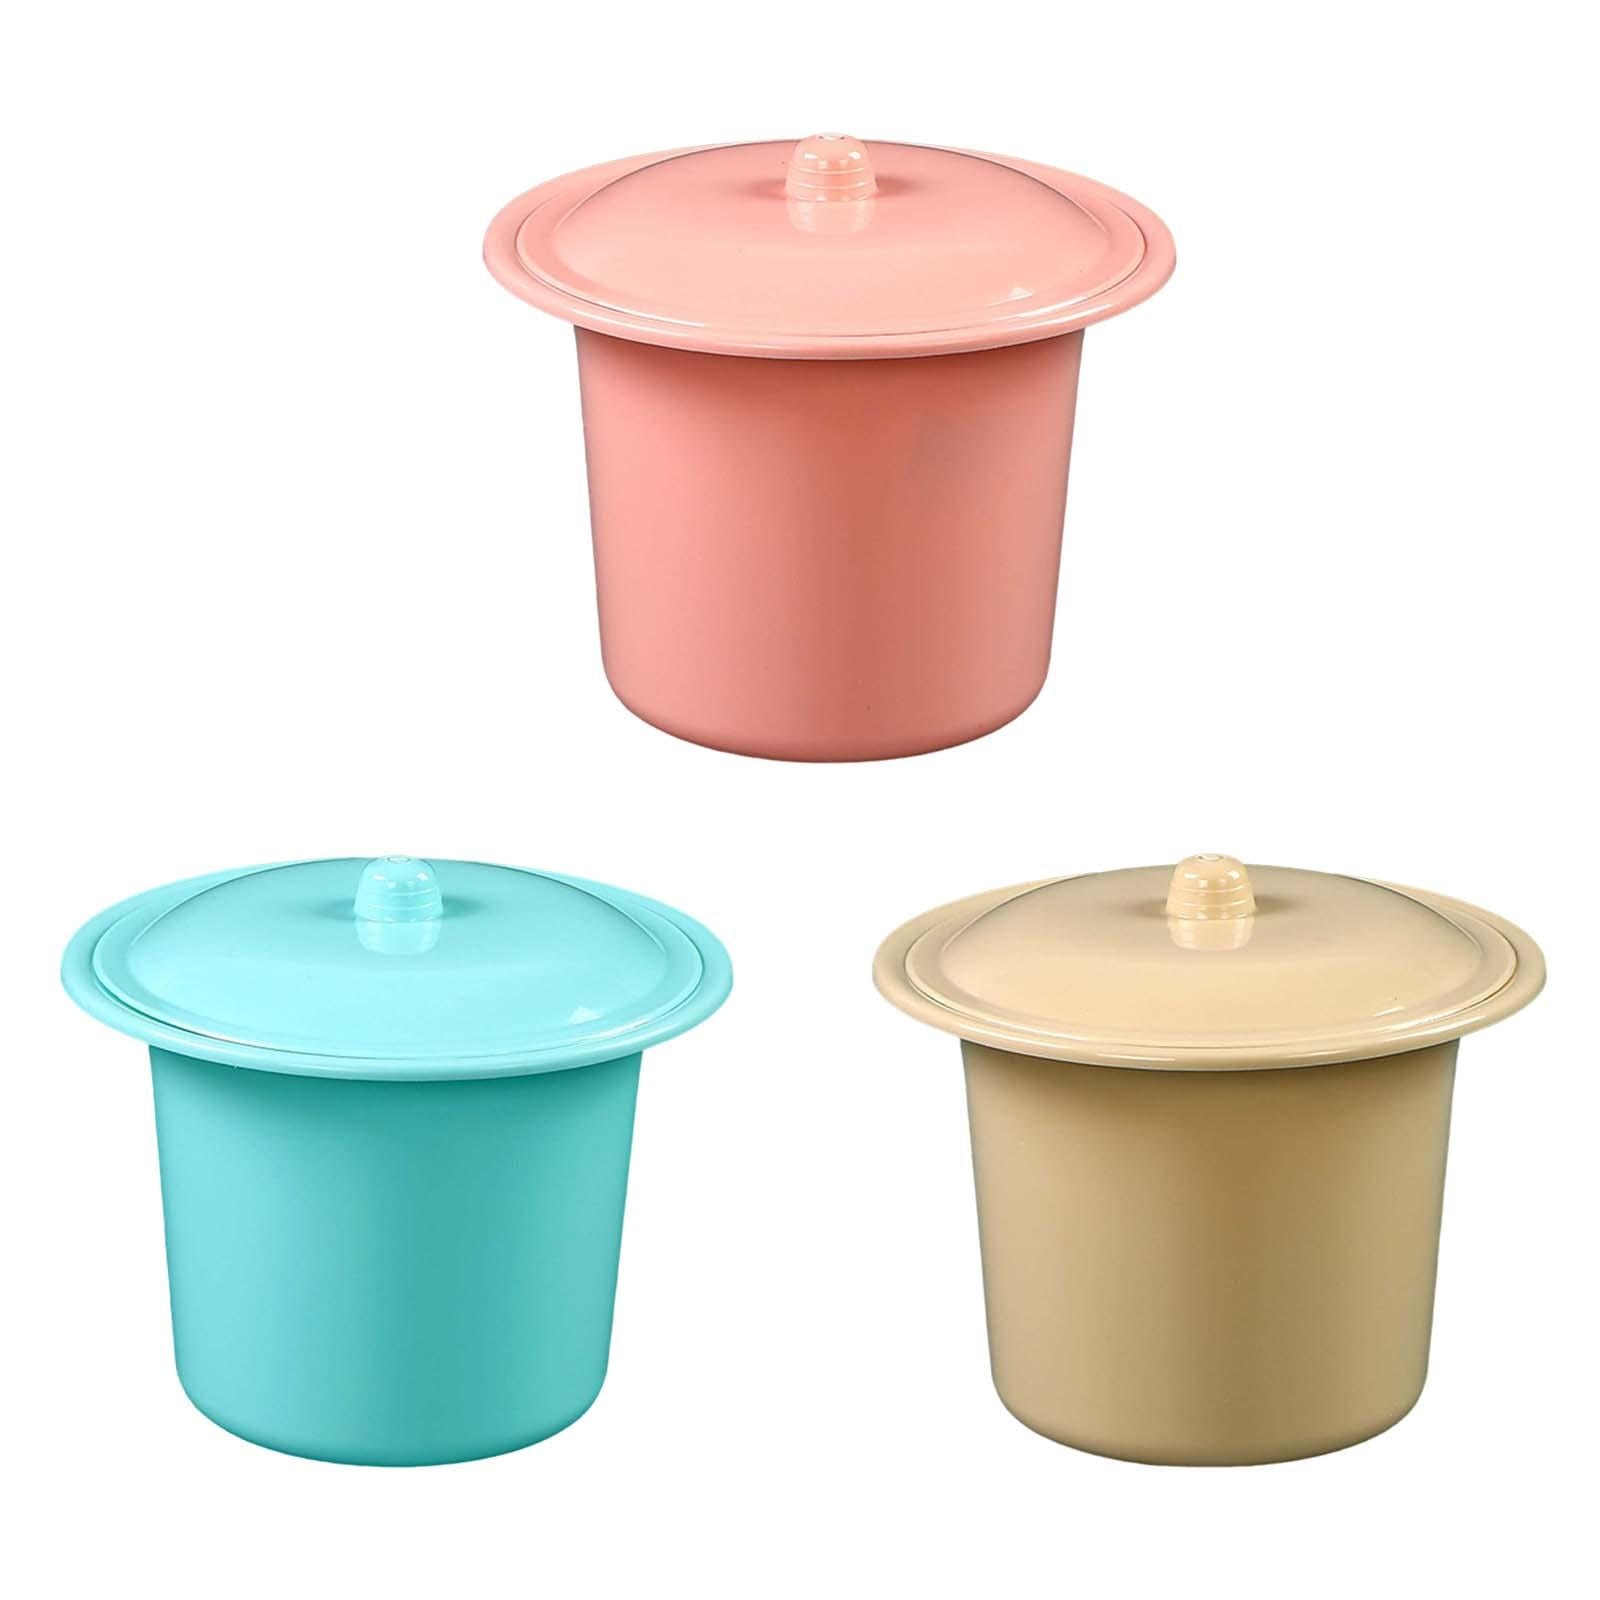 Compact Spittoon Splashproof PP Plastic with Lid Mobile Toilet Potty Pot Urinal Pot for Travel Camping Outdoor Elderly Adults